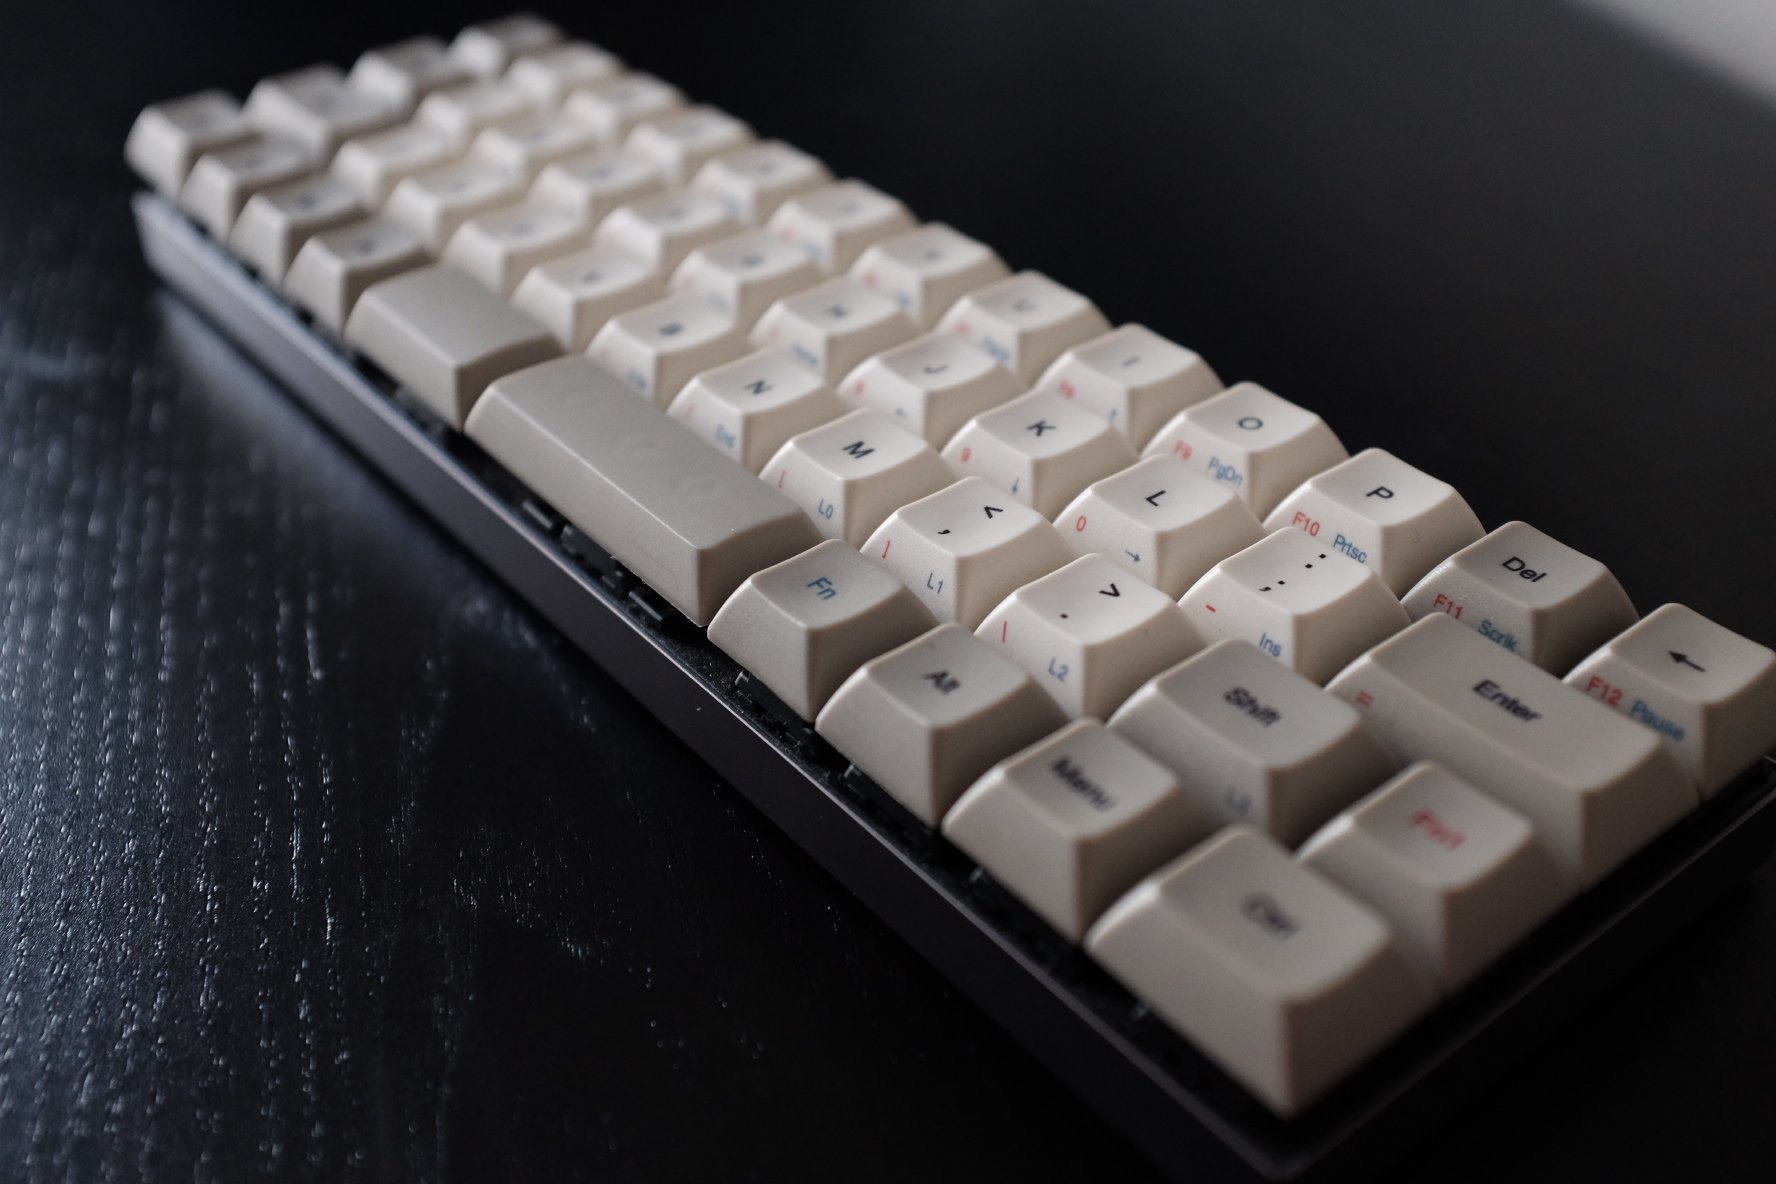 The Vortex Core – The Brooks Review